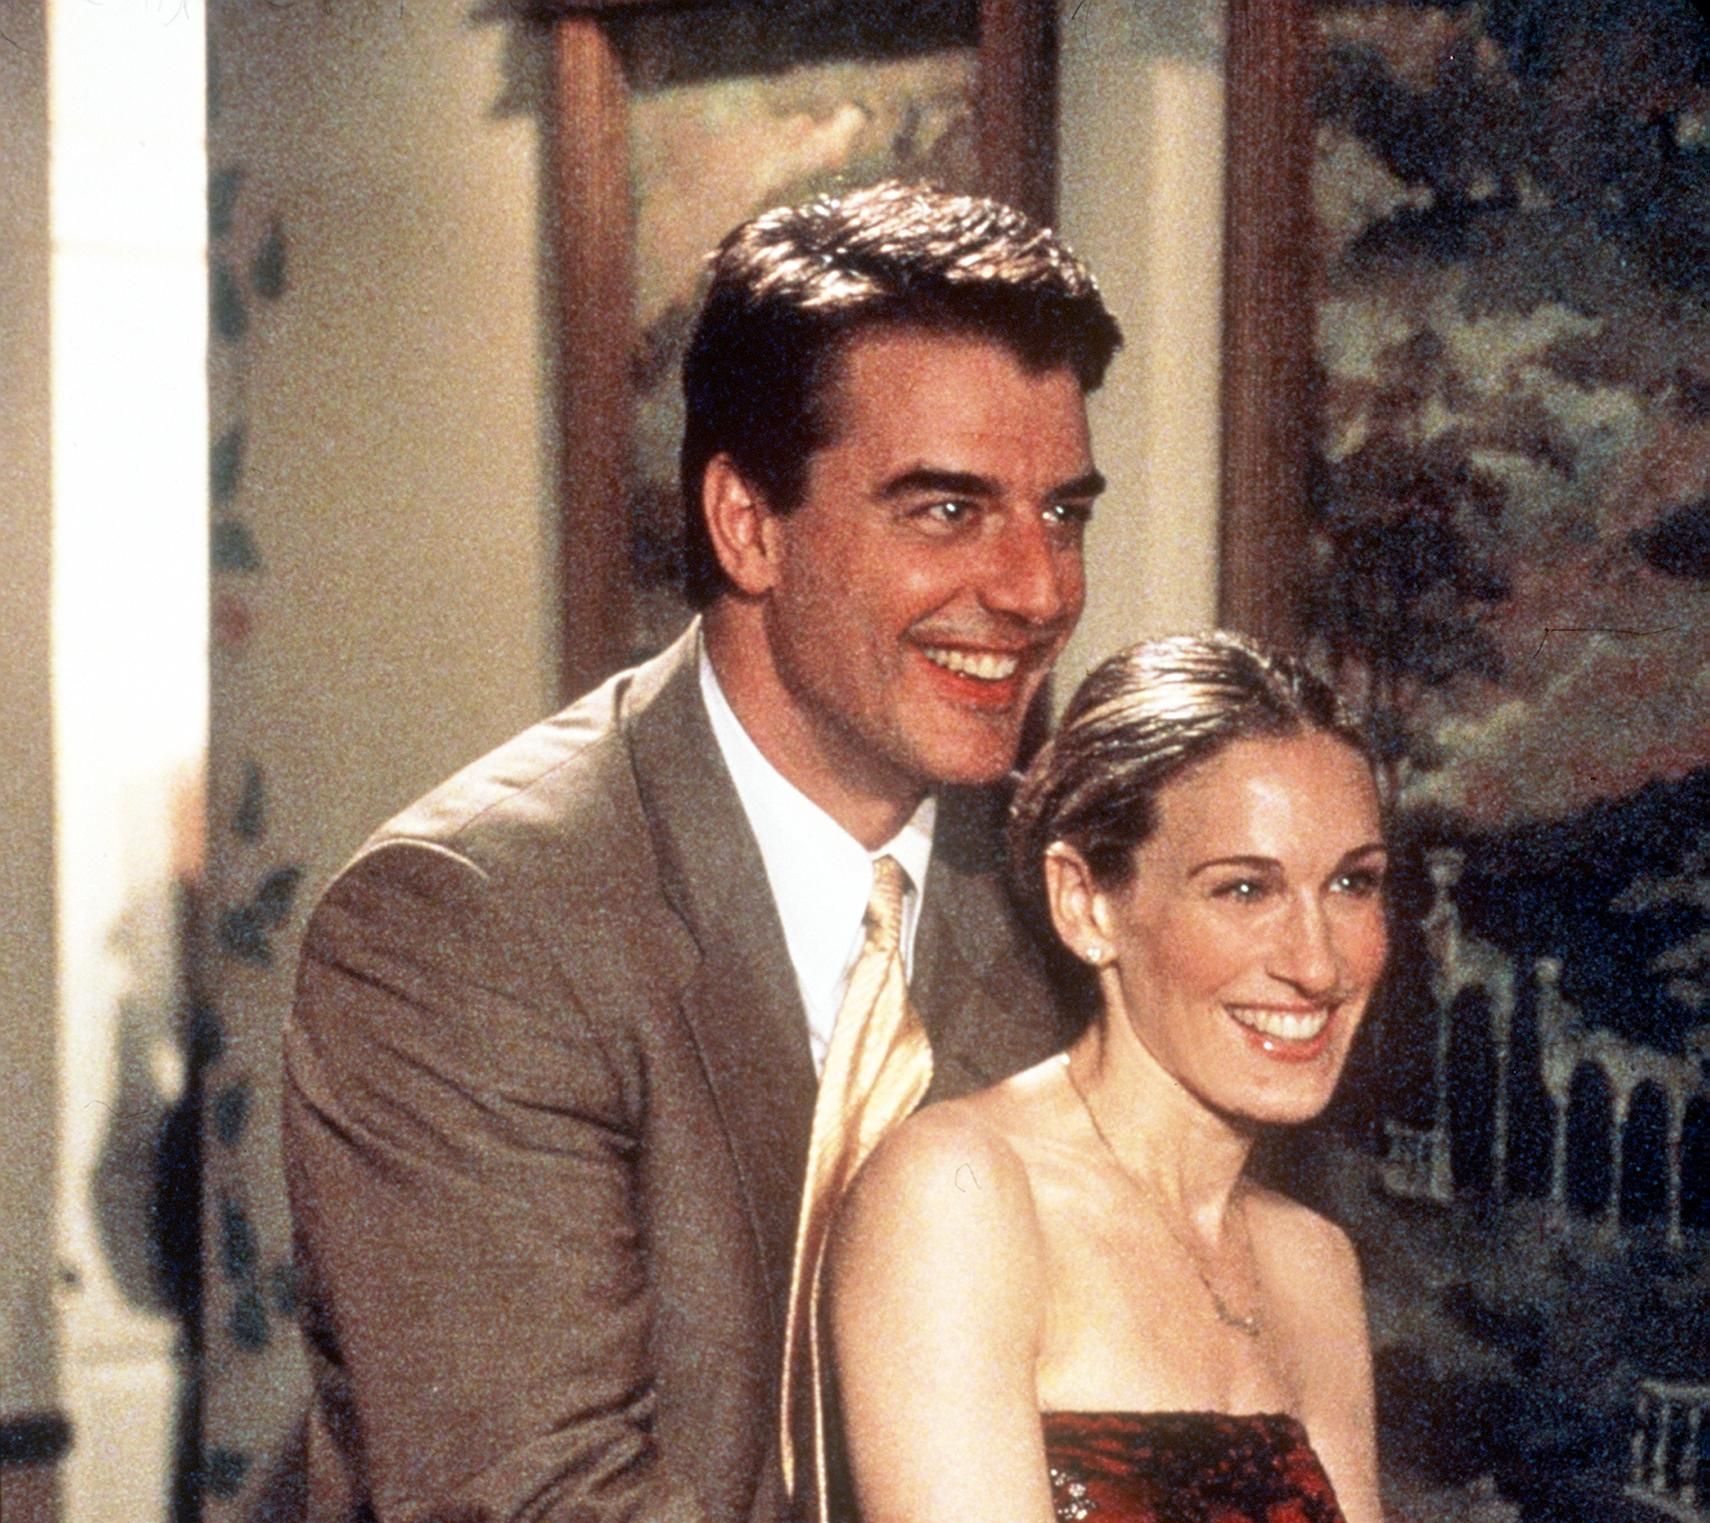 chris noth and sarah jessica parker star in sex and the city the man, the myth, the viagra episode 1999 paramount pictures